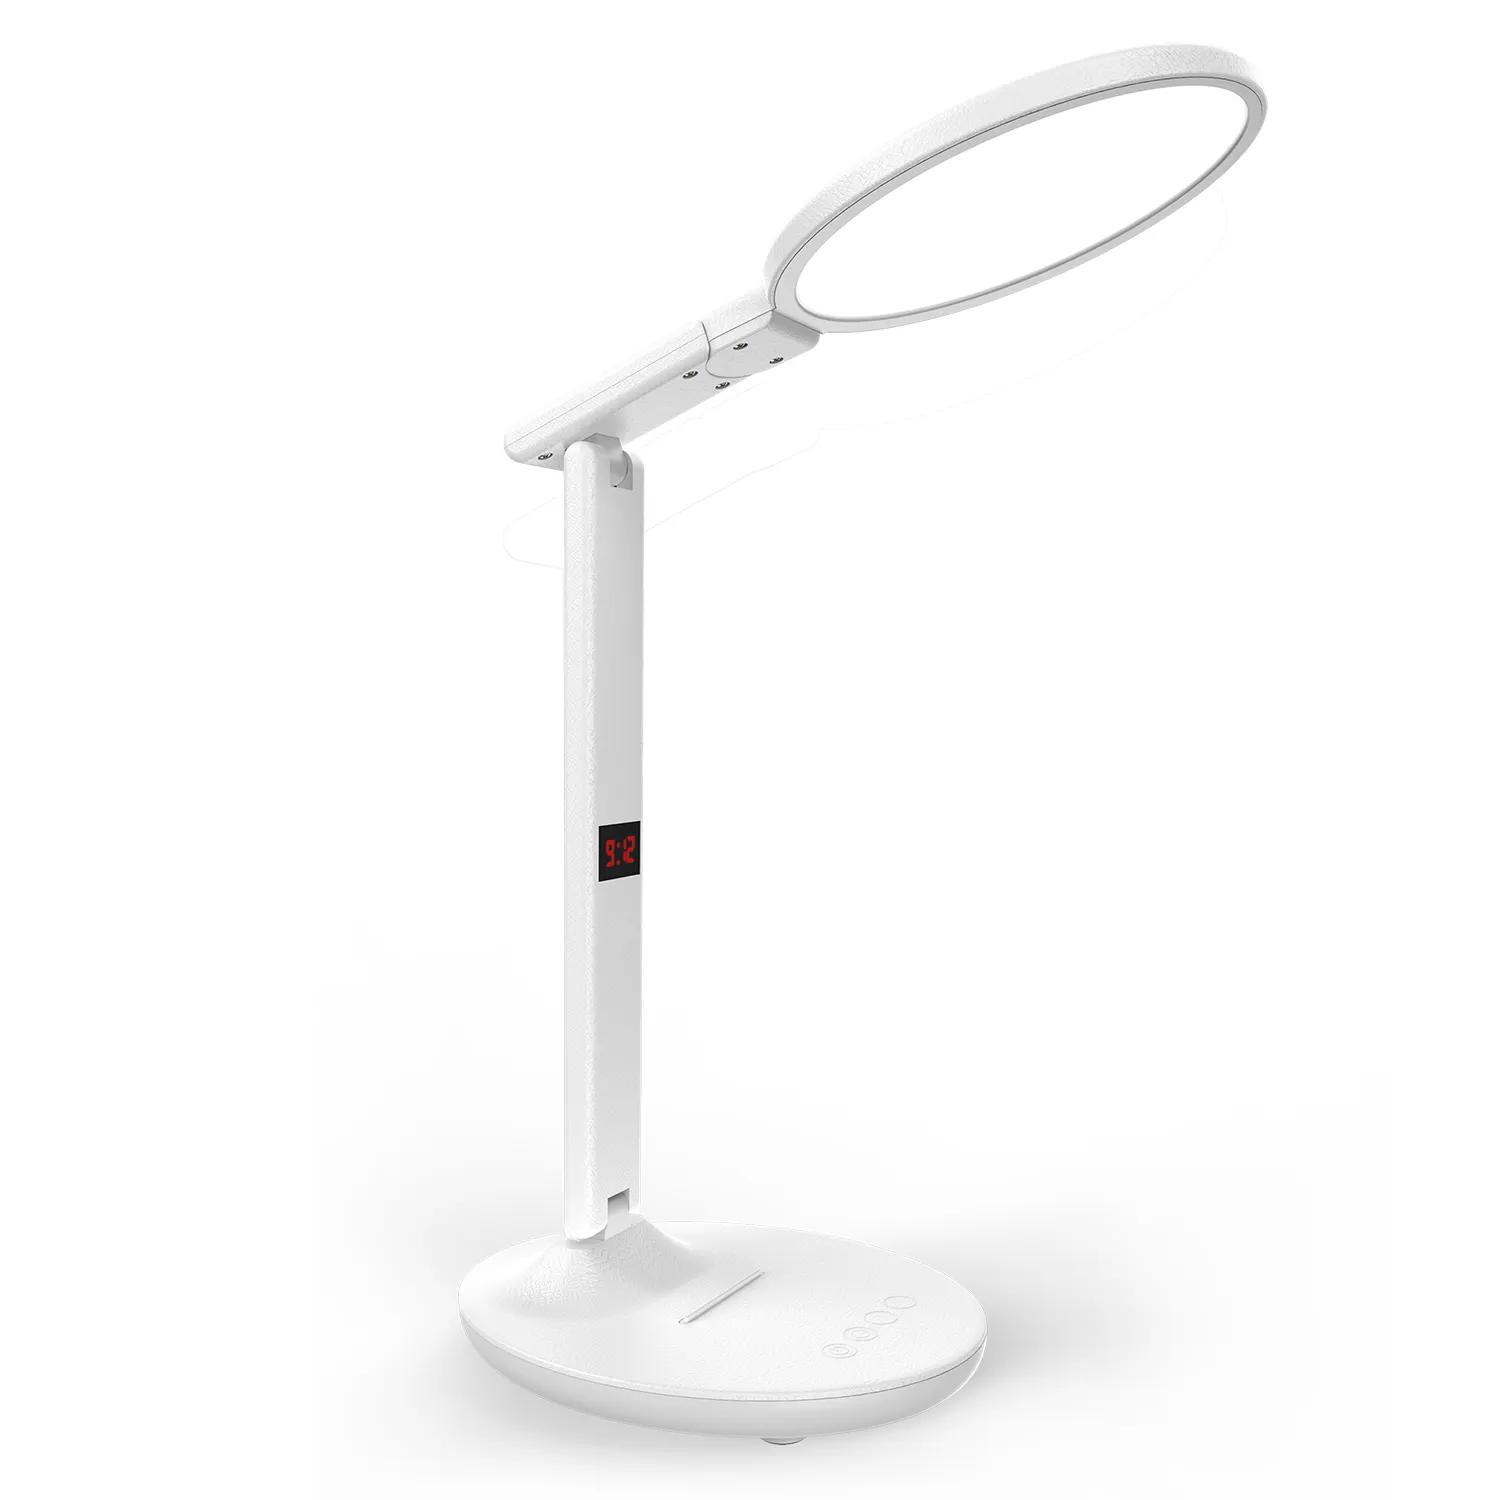 The folding and storing LED table lamp can be adjusted by the filling and plugging three gear brightness